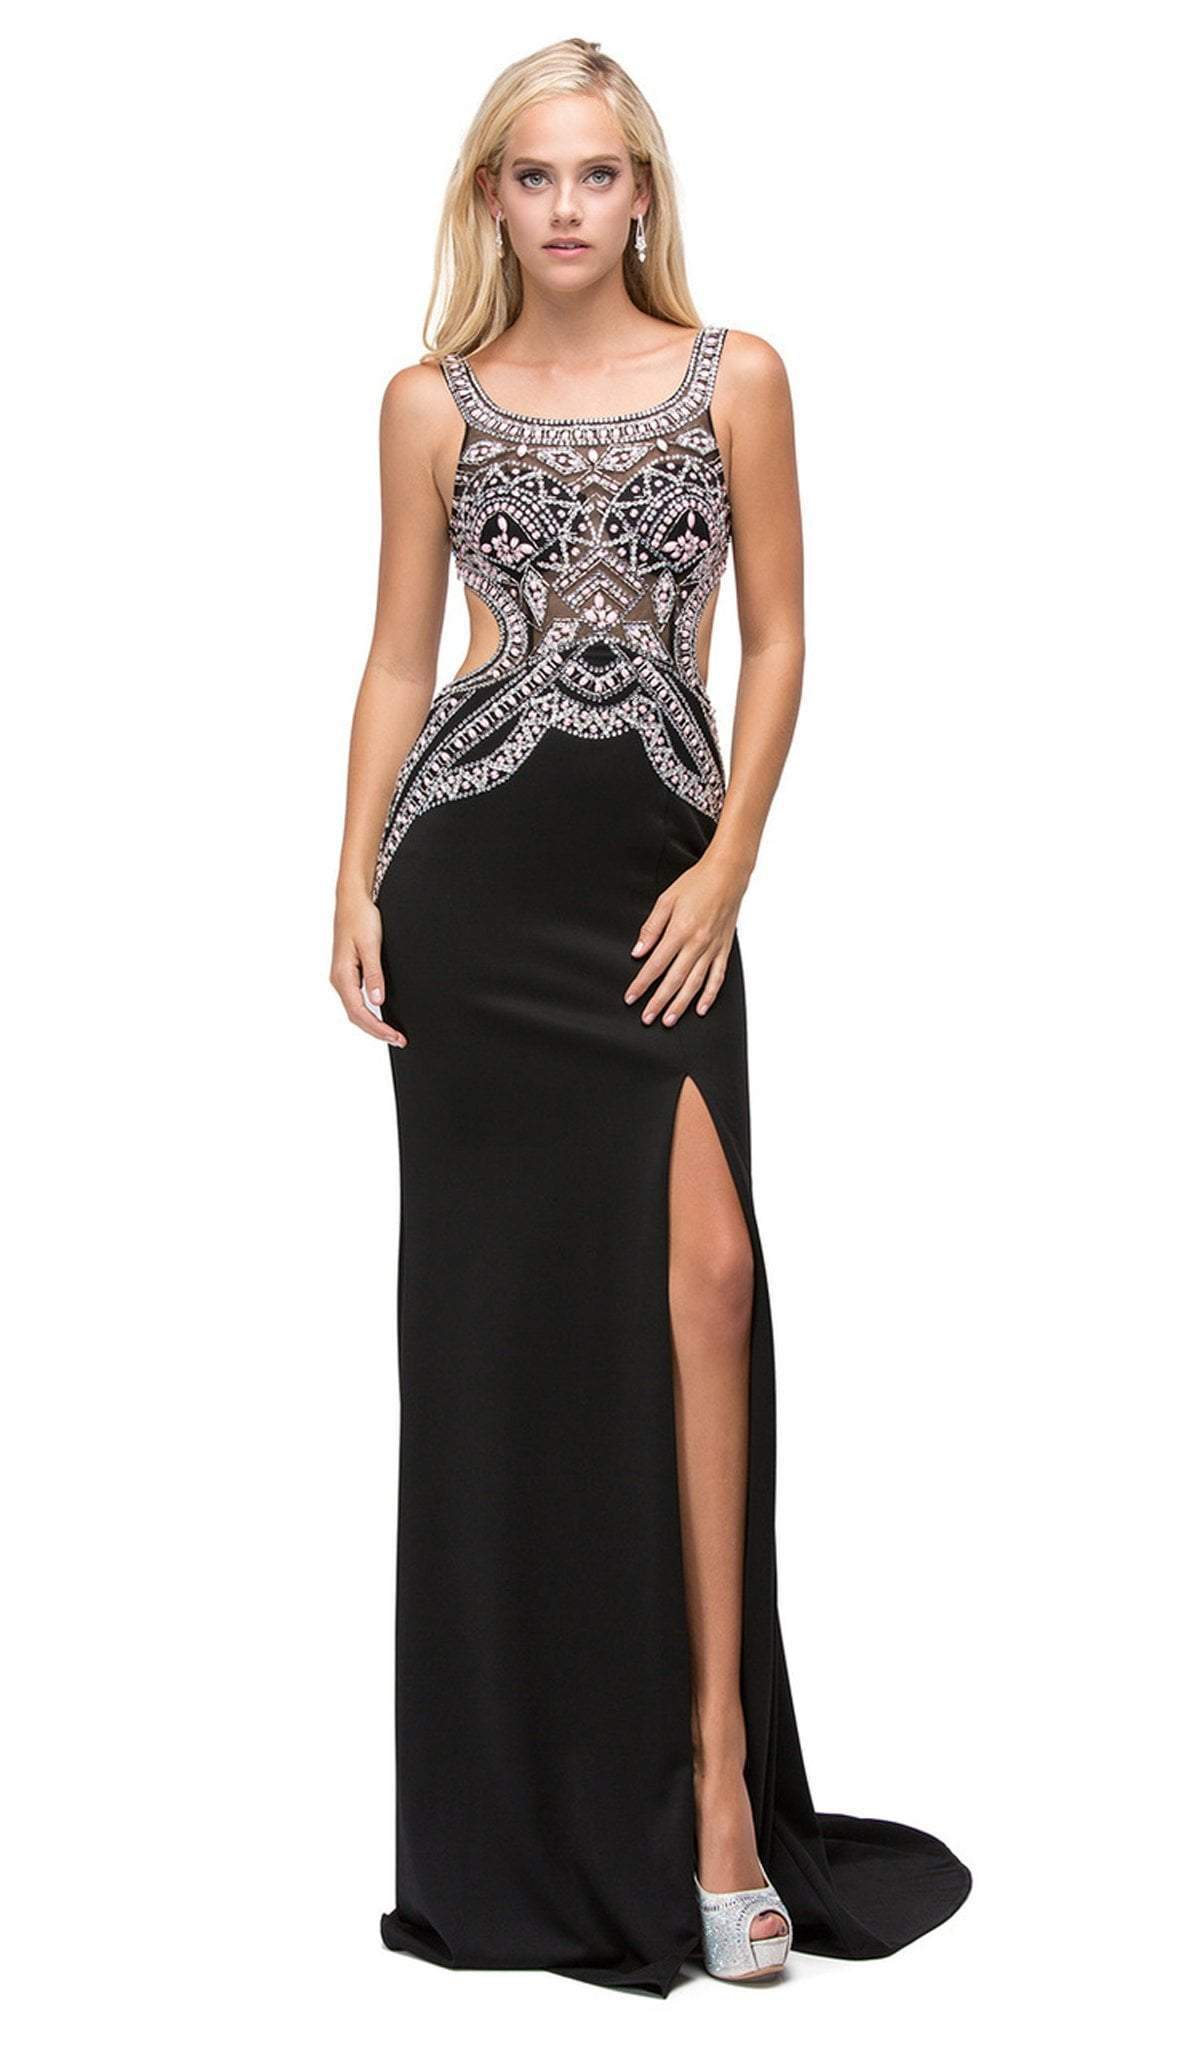 Dancing Queen - 9612 Stunning Long Scoop-Neck Prom Dress Special Occasion Dress XS / Black/Blush